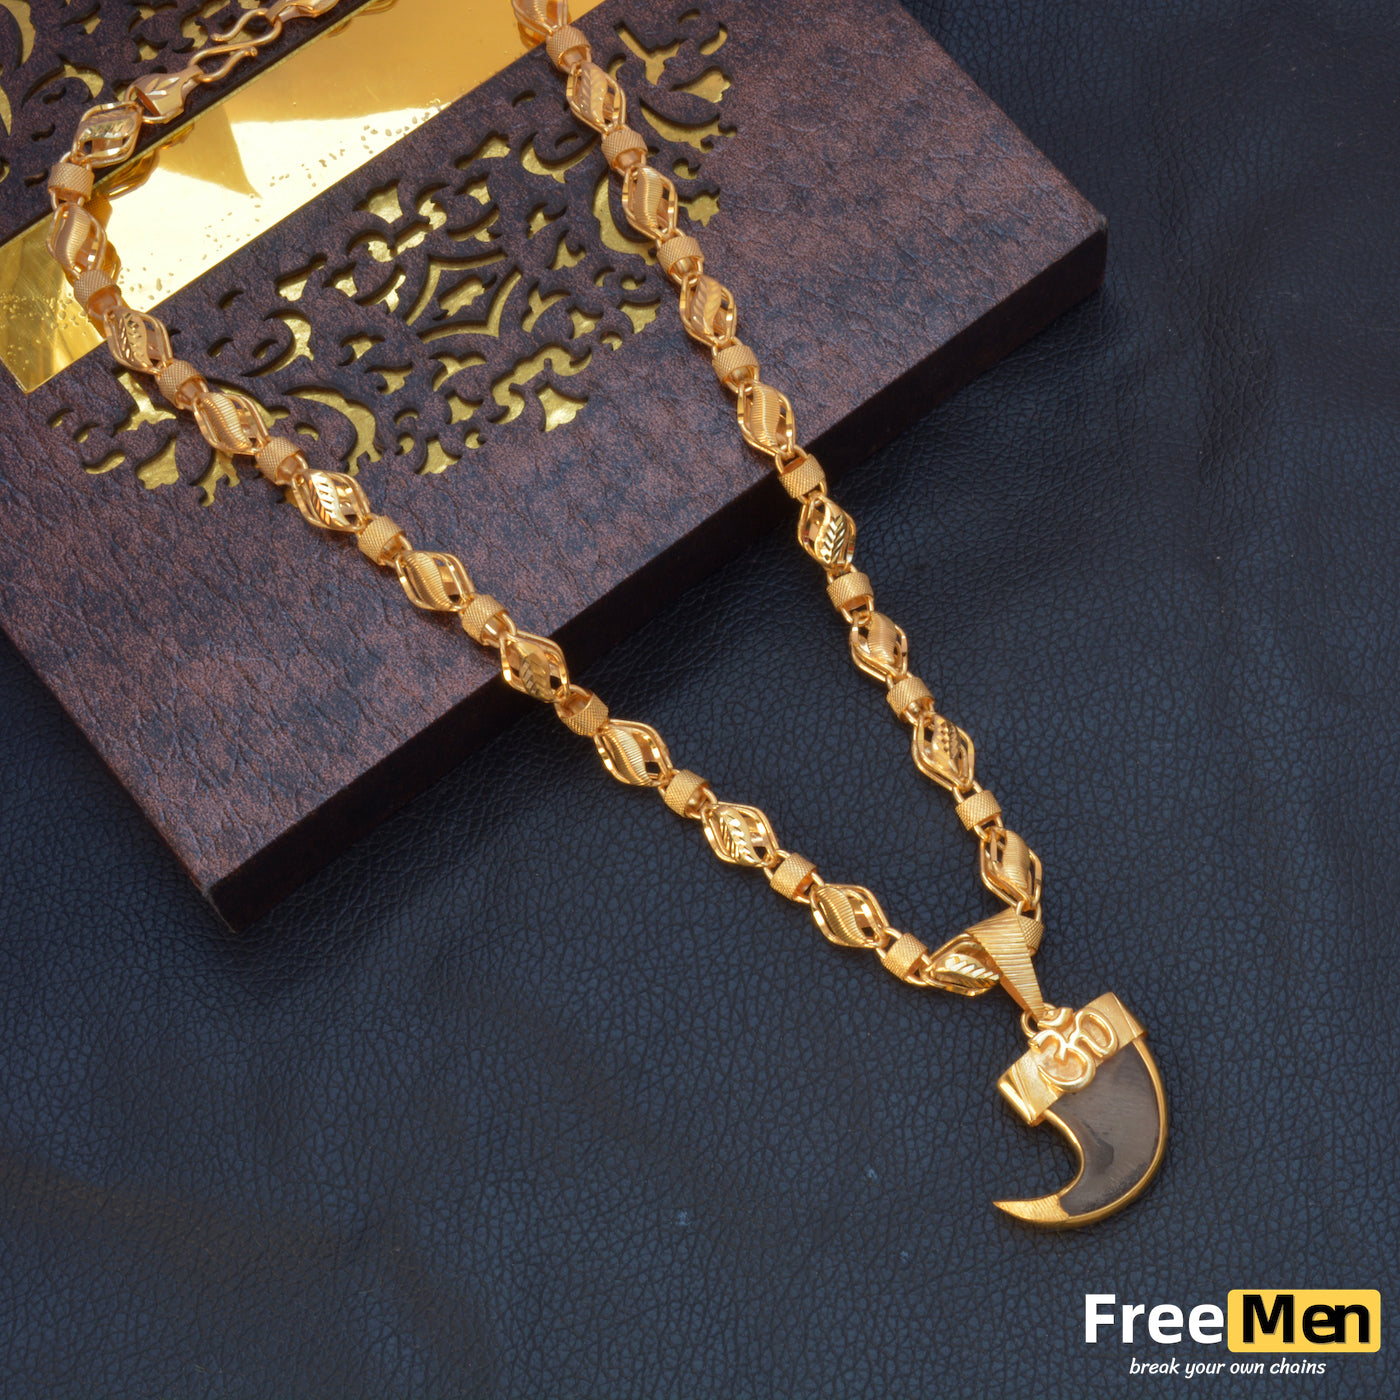 Dual Lion Nail with Diamond Antique Design Gold Plated Pendant for Men -  Style B528 - Soni Fashion at Rs 700.00, Rajkot | ID: 2850406150573